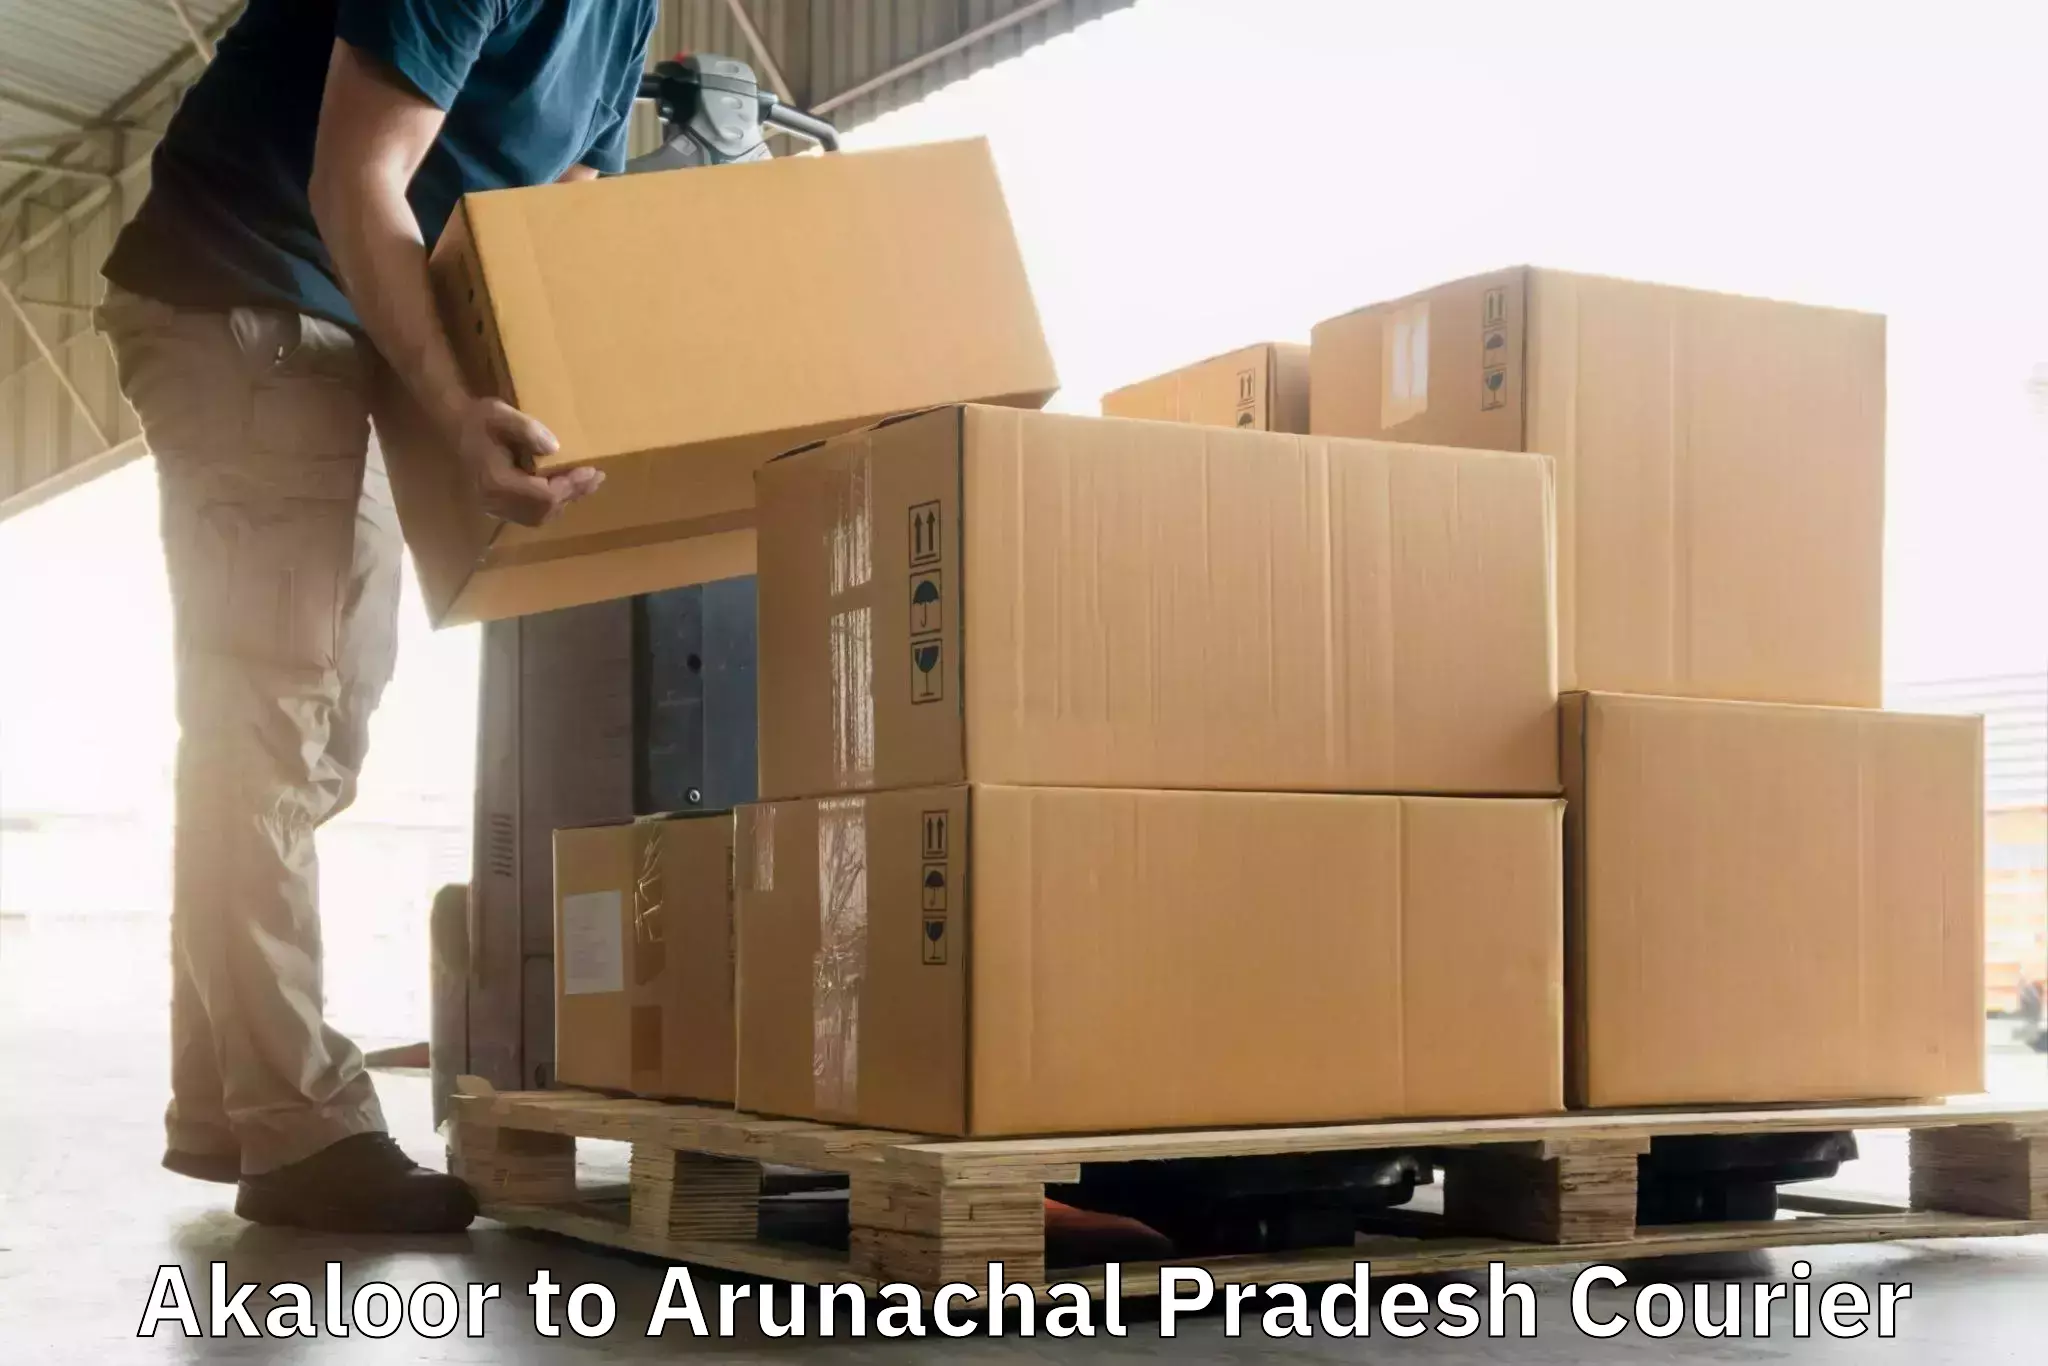 Multi-national courier services Akaloor to Pasighat